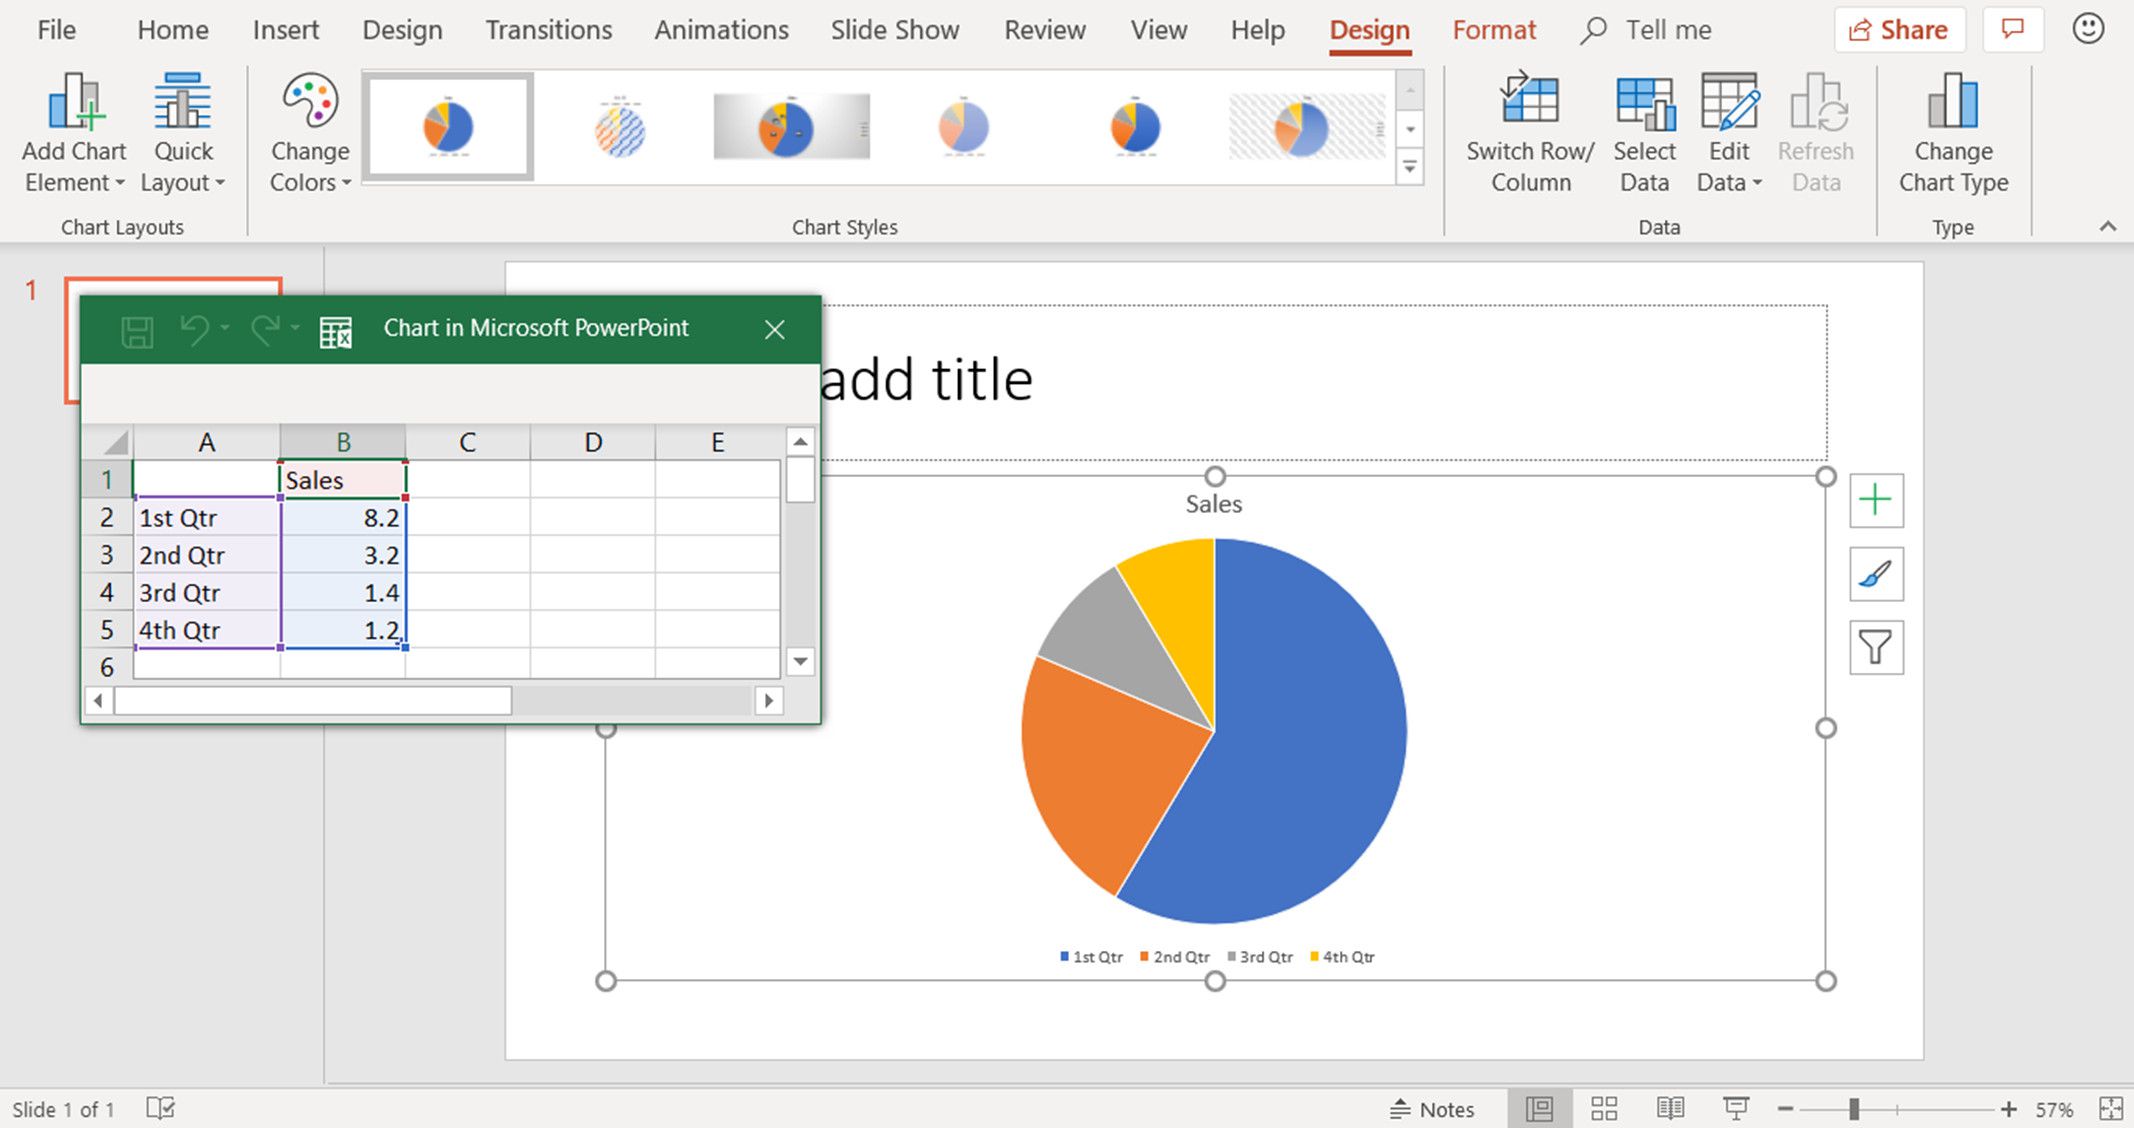 How to Create a Pie Chart on a PowerPoint Slide